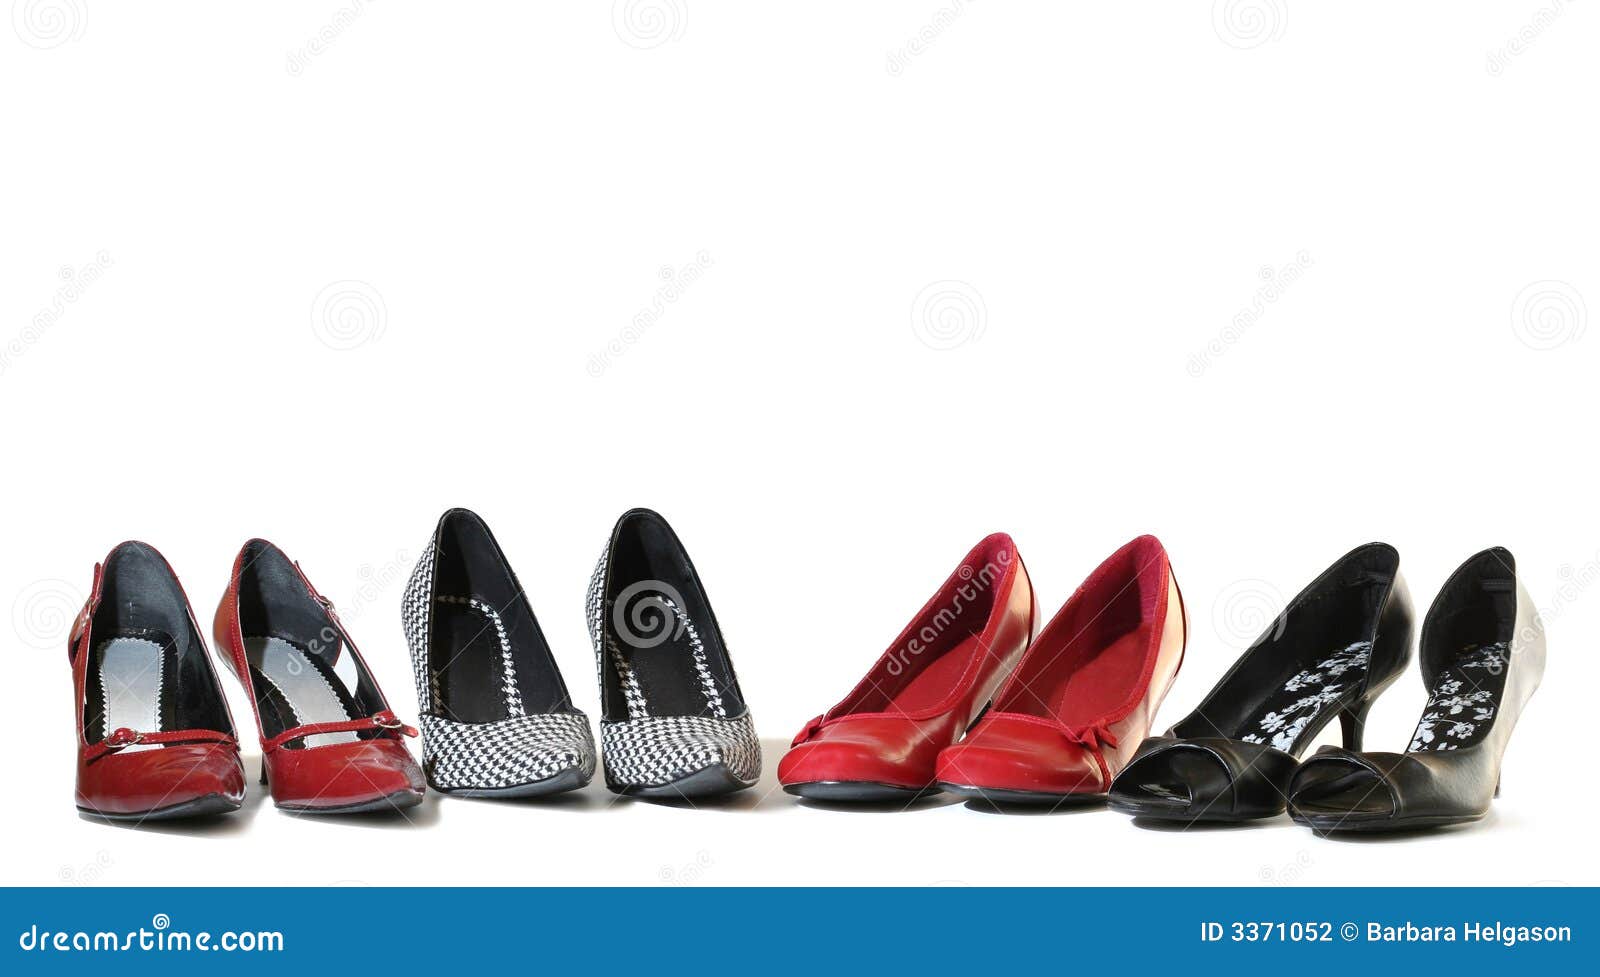 Ladies shoes. stock photo. Image of style, female, accessory - 3371052